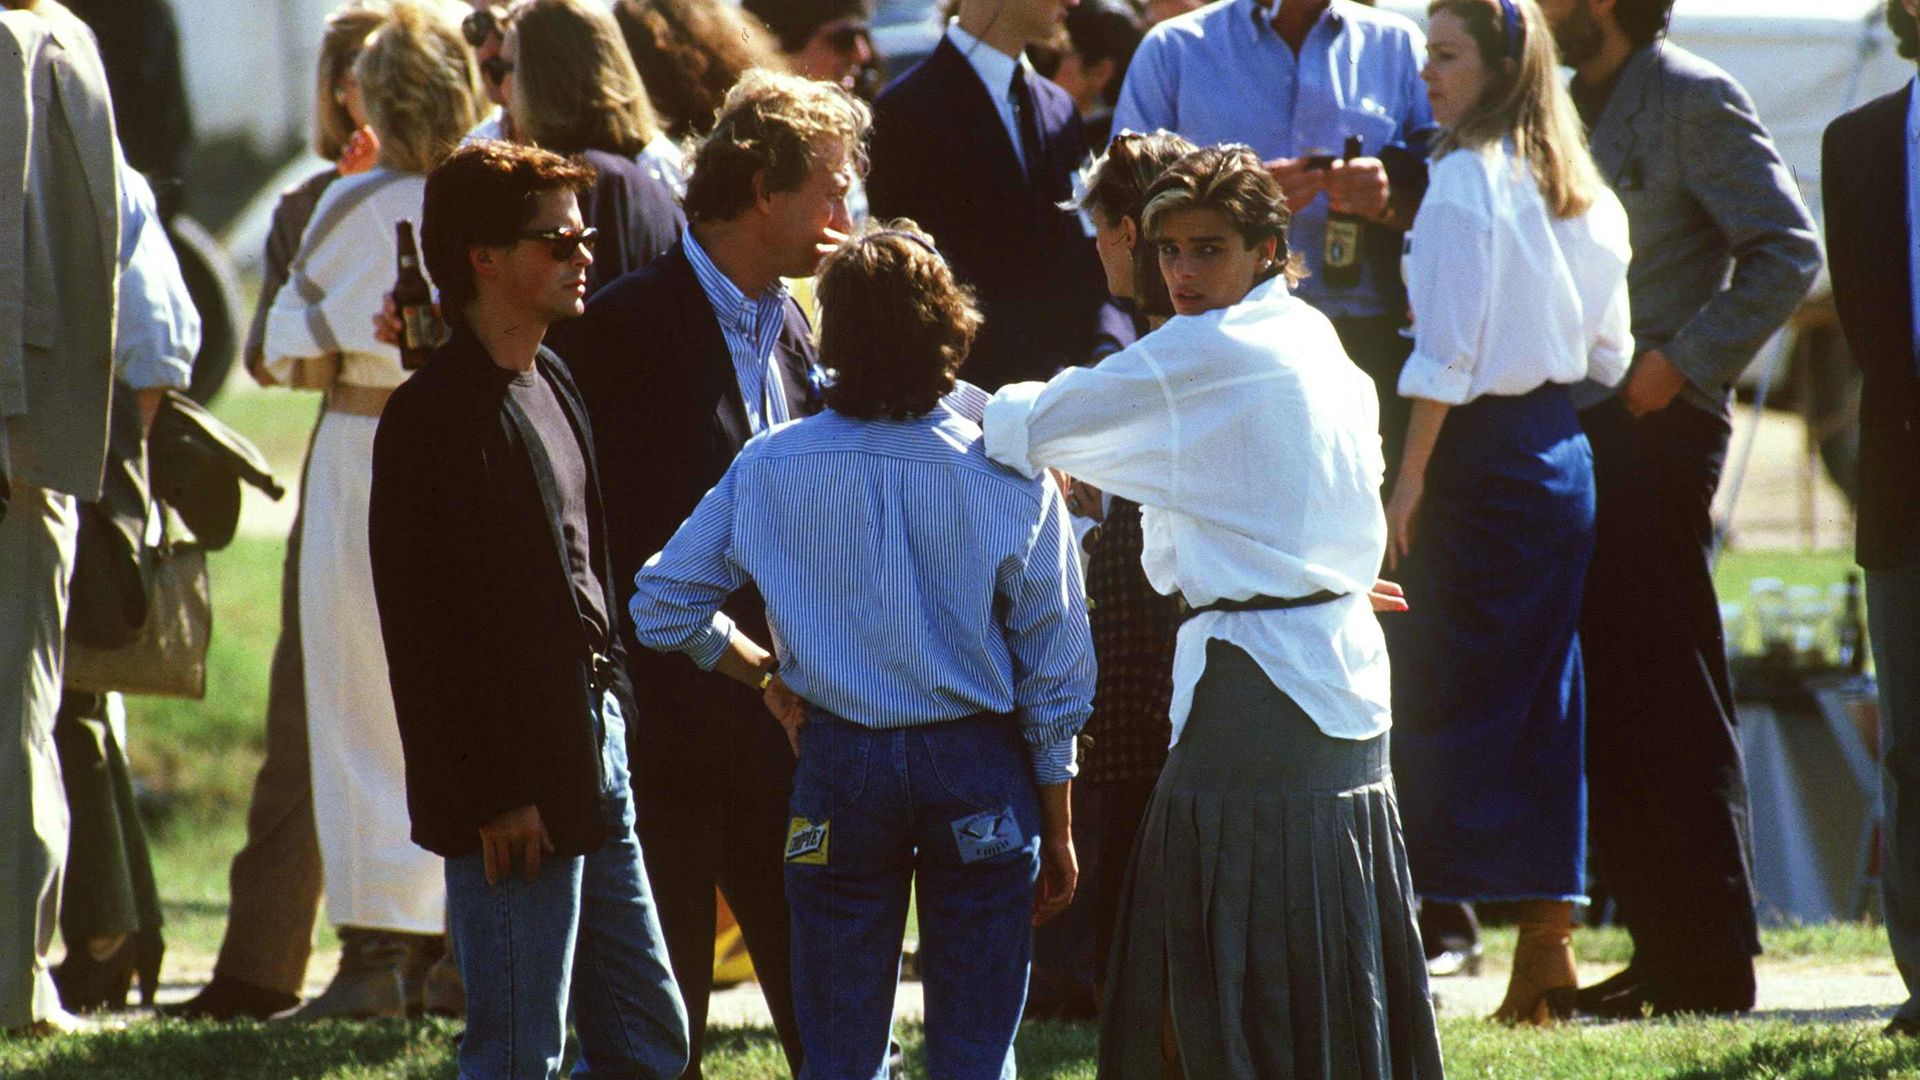 Rob and Stéphanie pictured with friends at an outdoor event in 1986